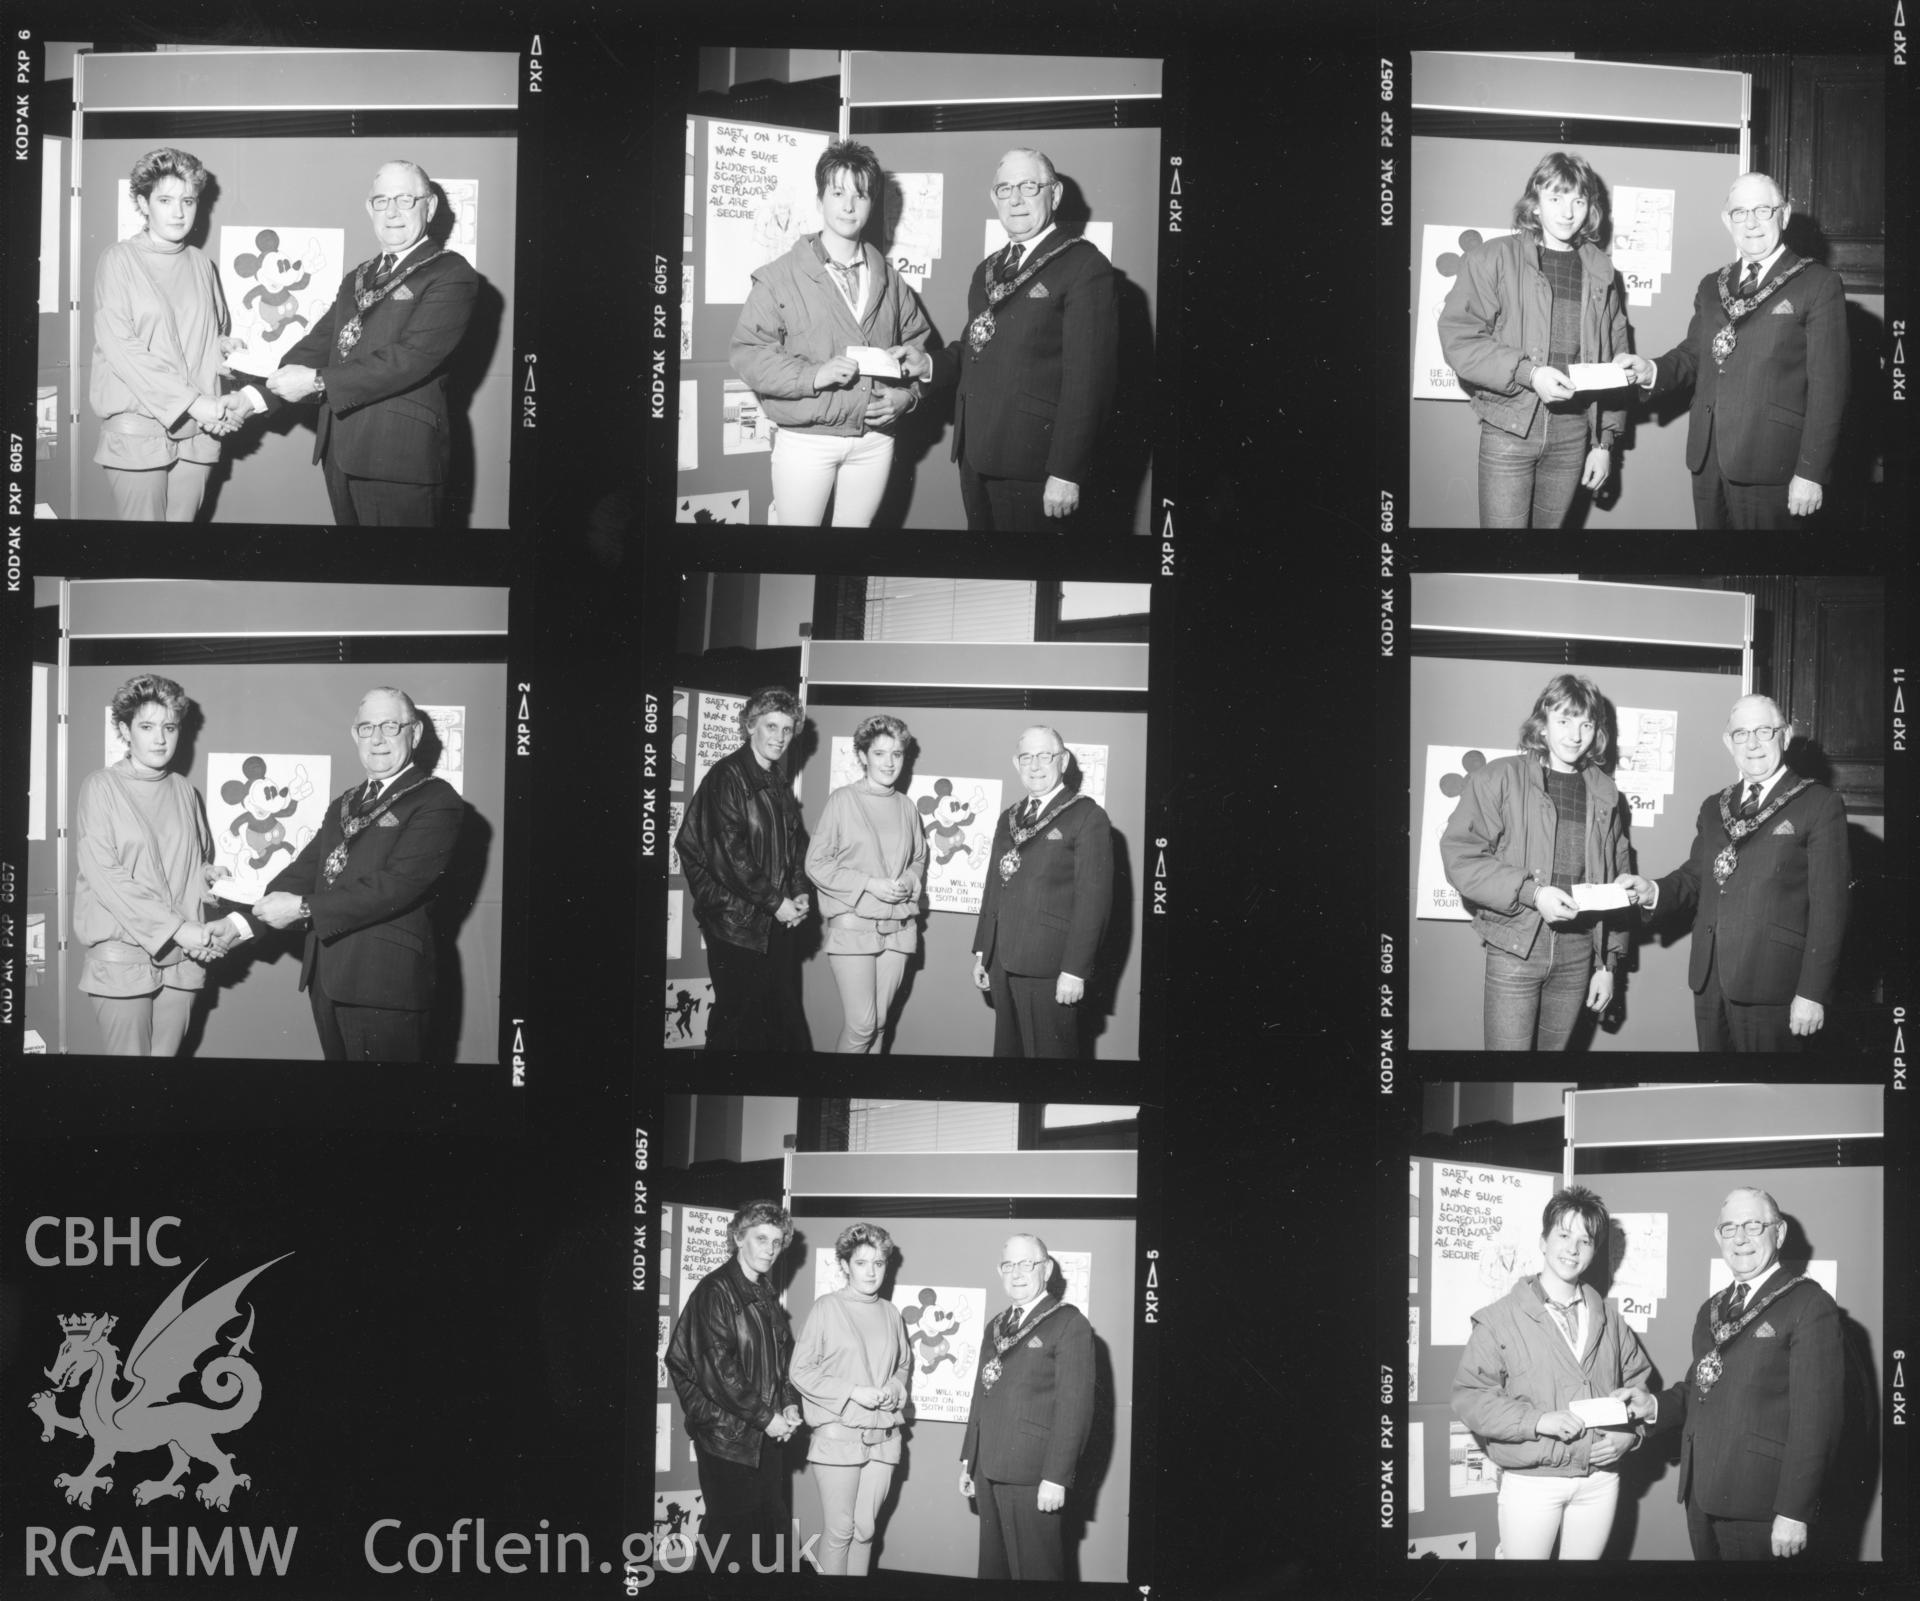 Contact sheet 2b of presentations for the poster competition at Llanelli Town Hall in 1986. From the Central Office of Information Collection.